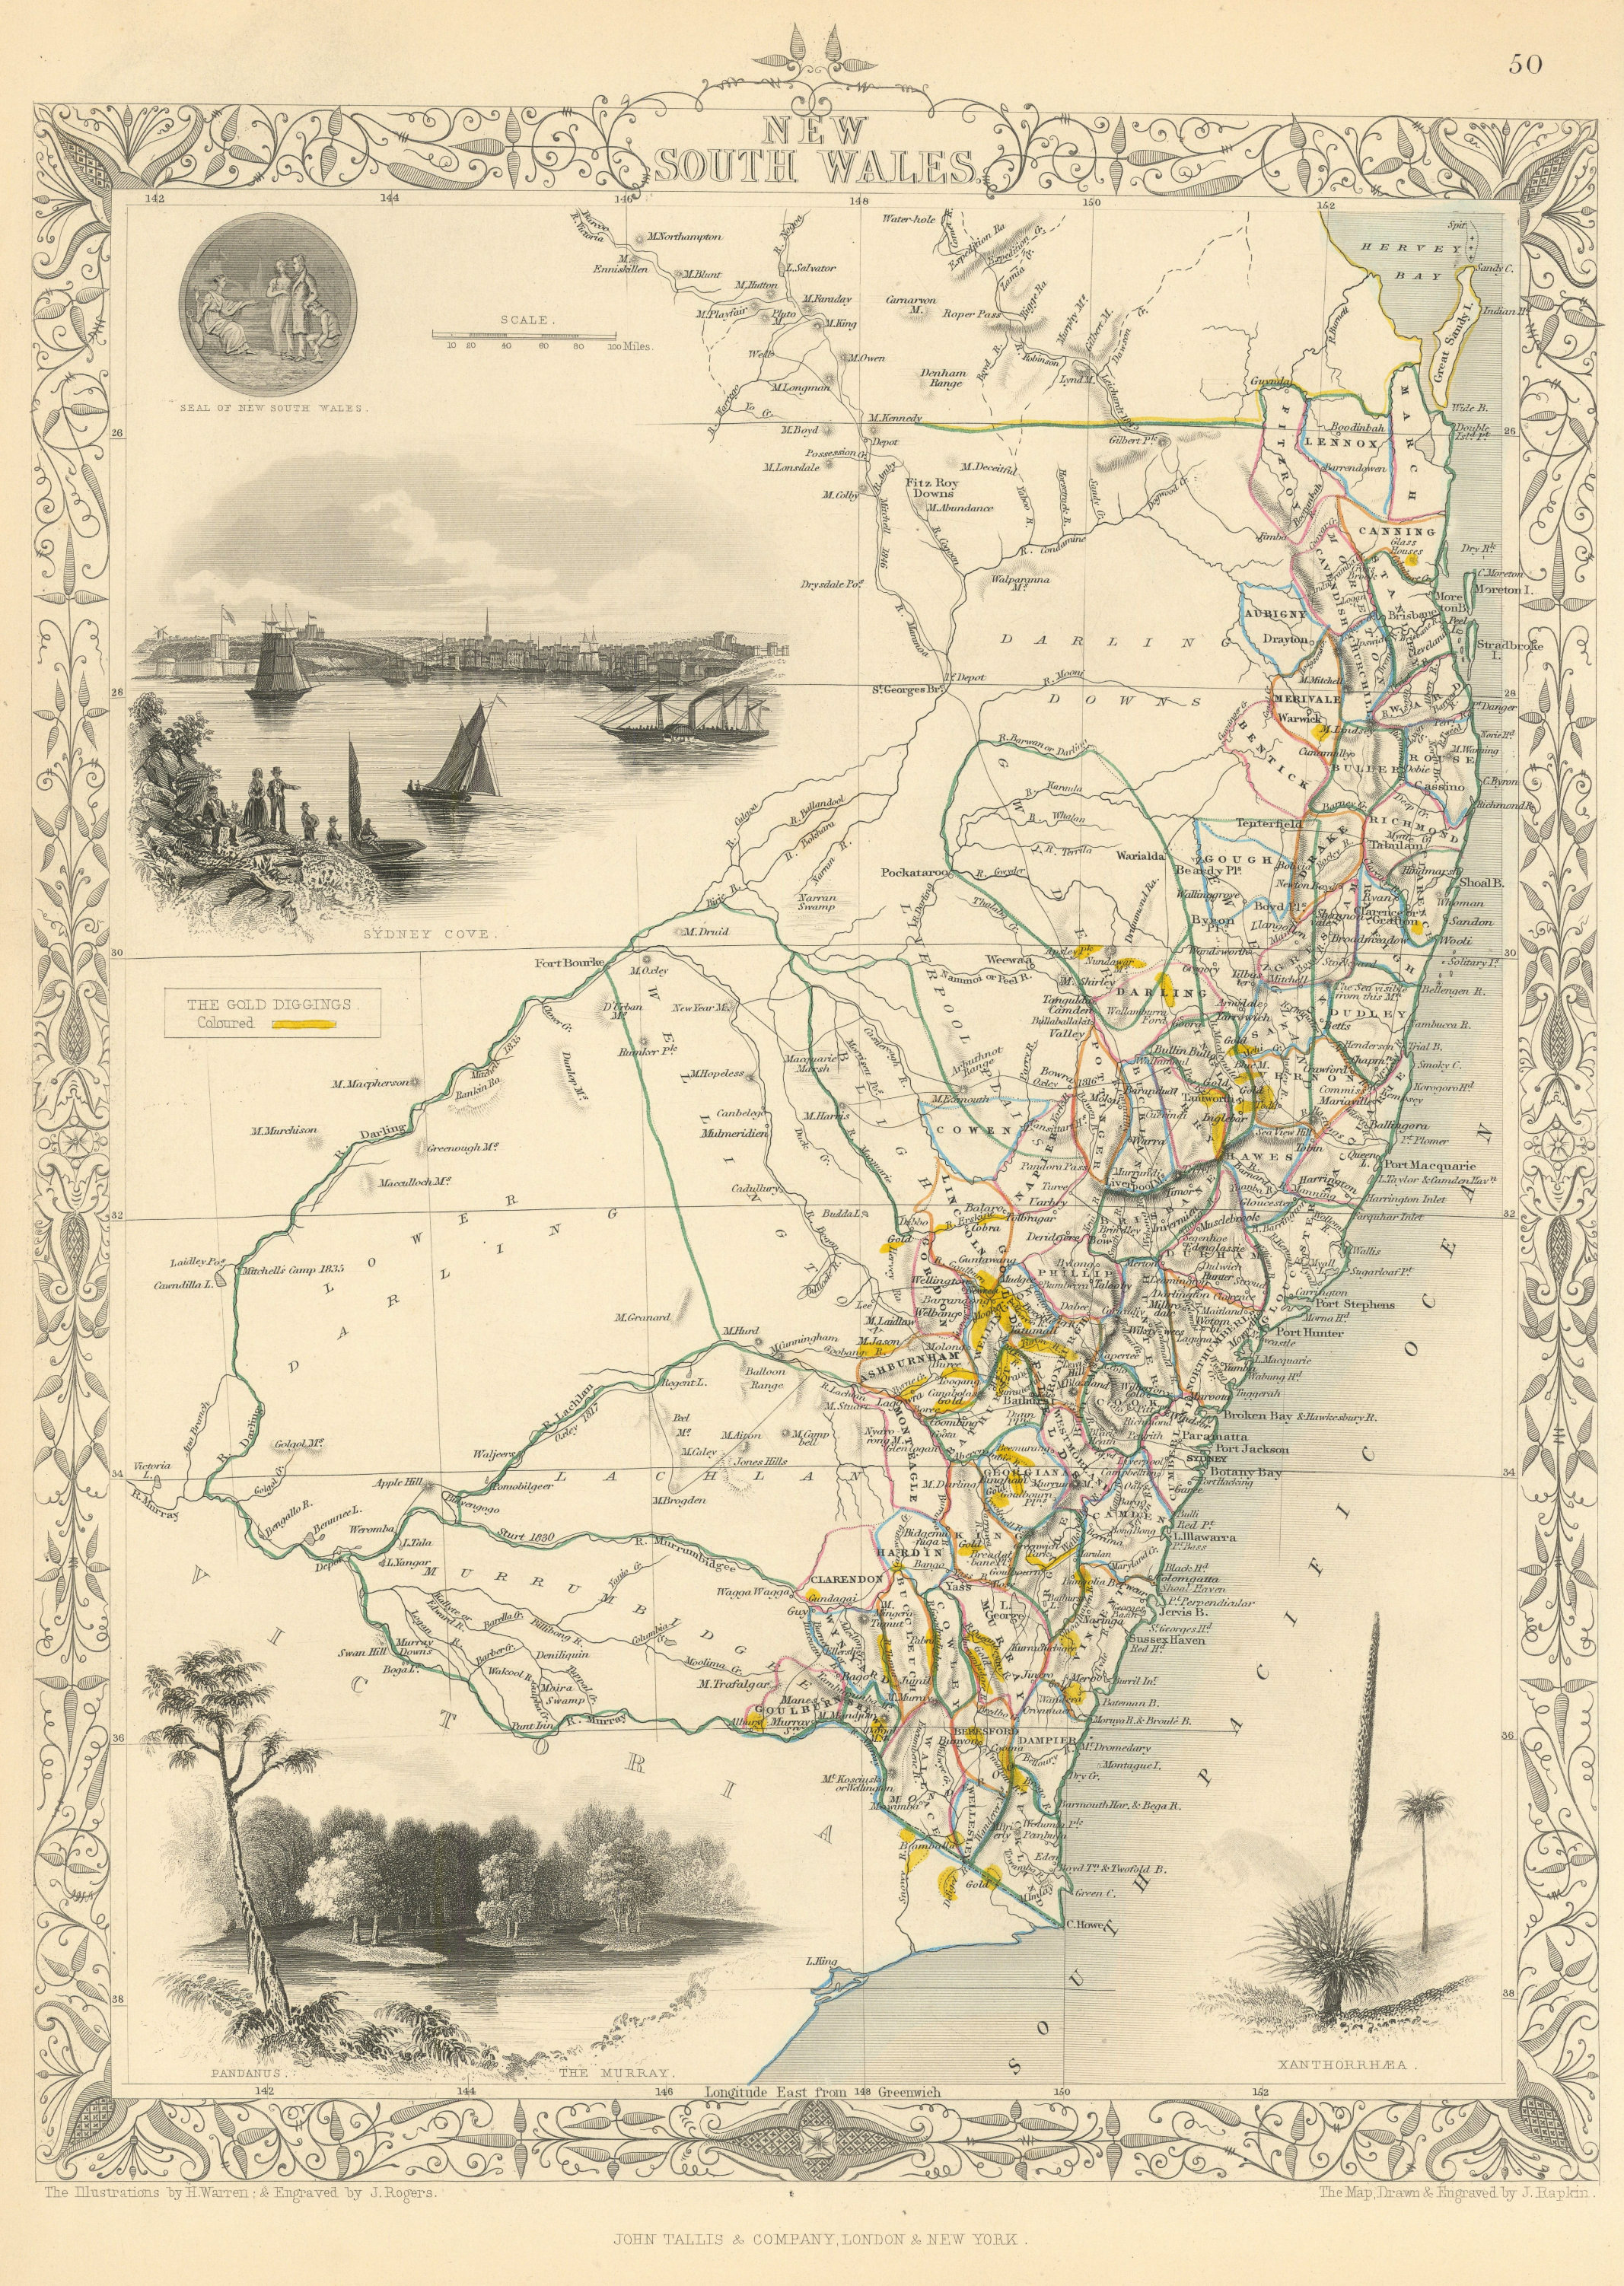 NEW SOUTH WALES showing Gold Rush fields/diggings. Sydney RAPKIN/TALLIS 1851 map